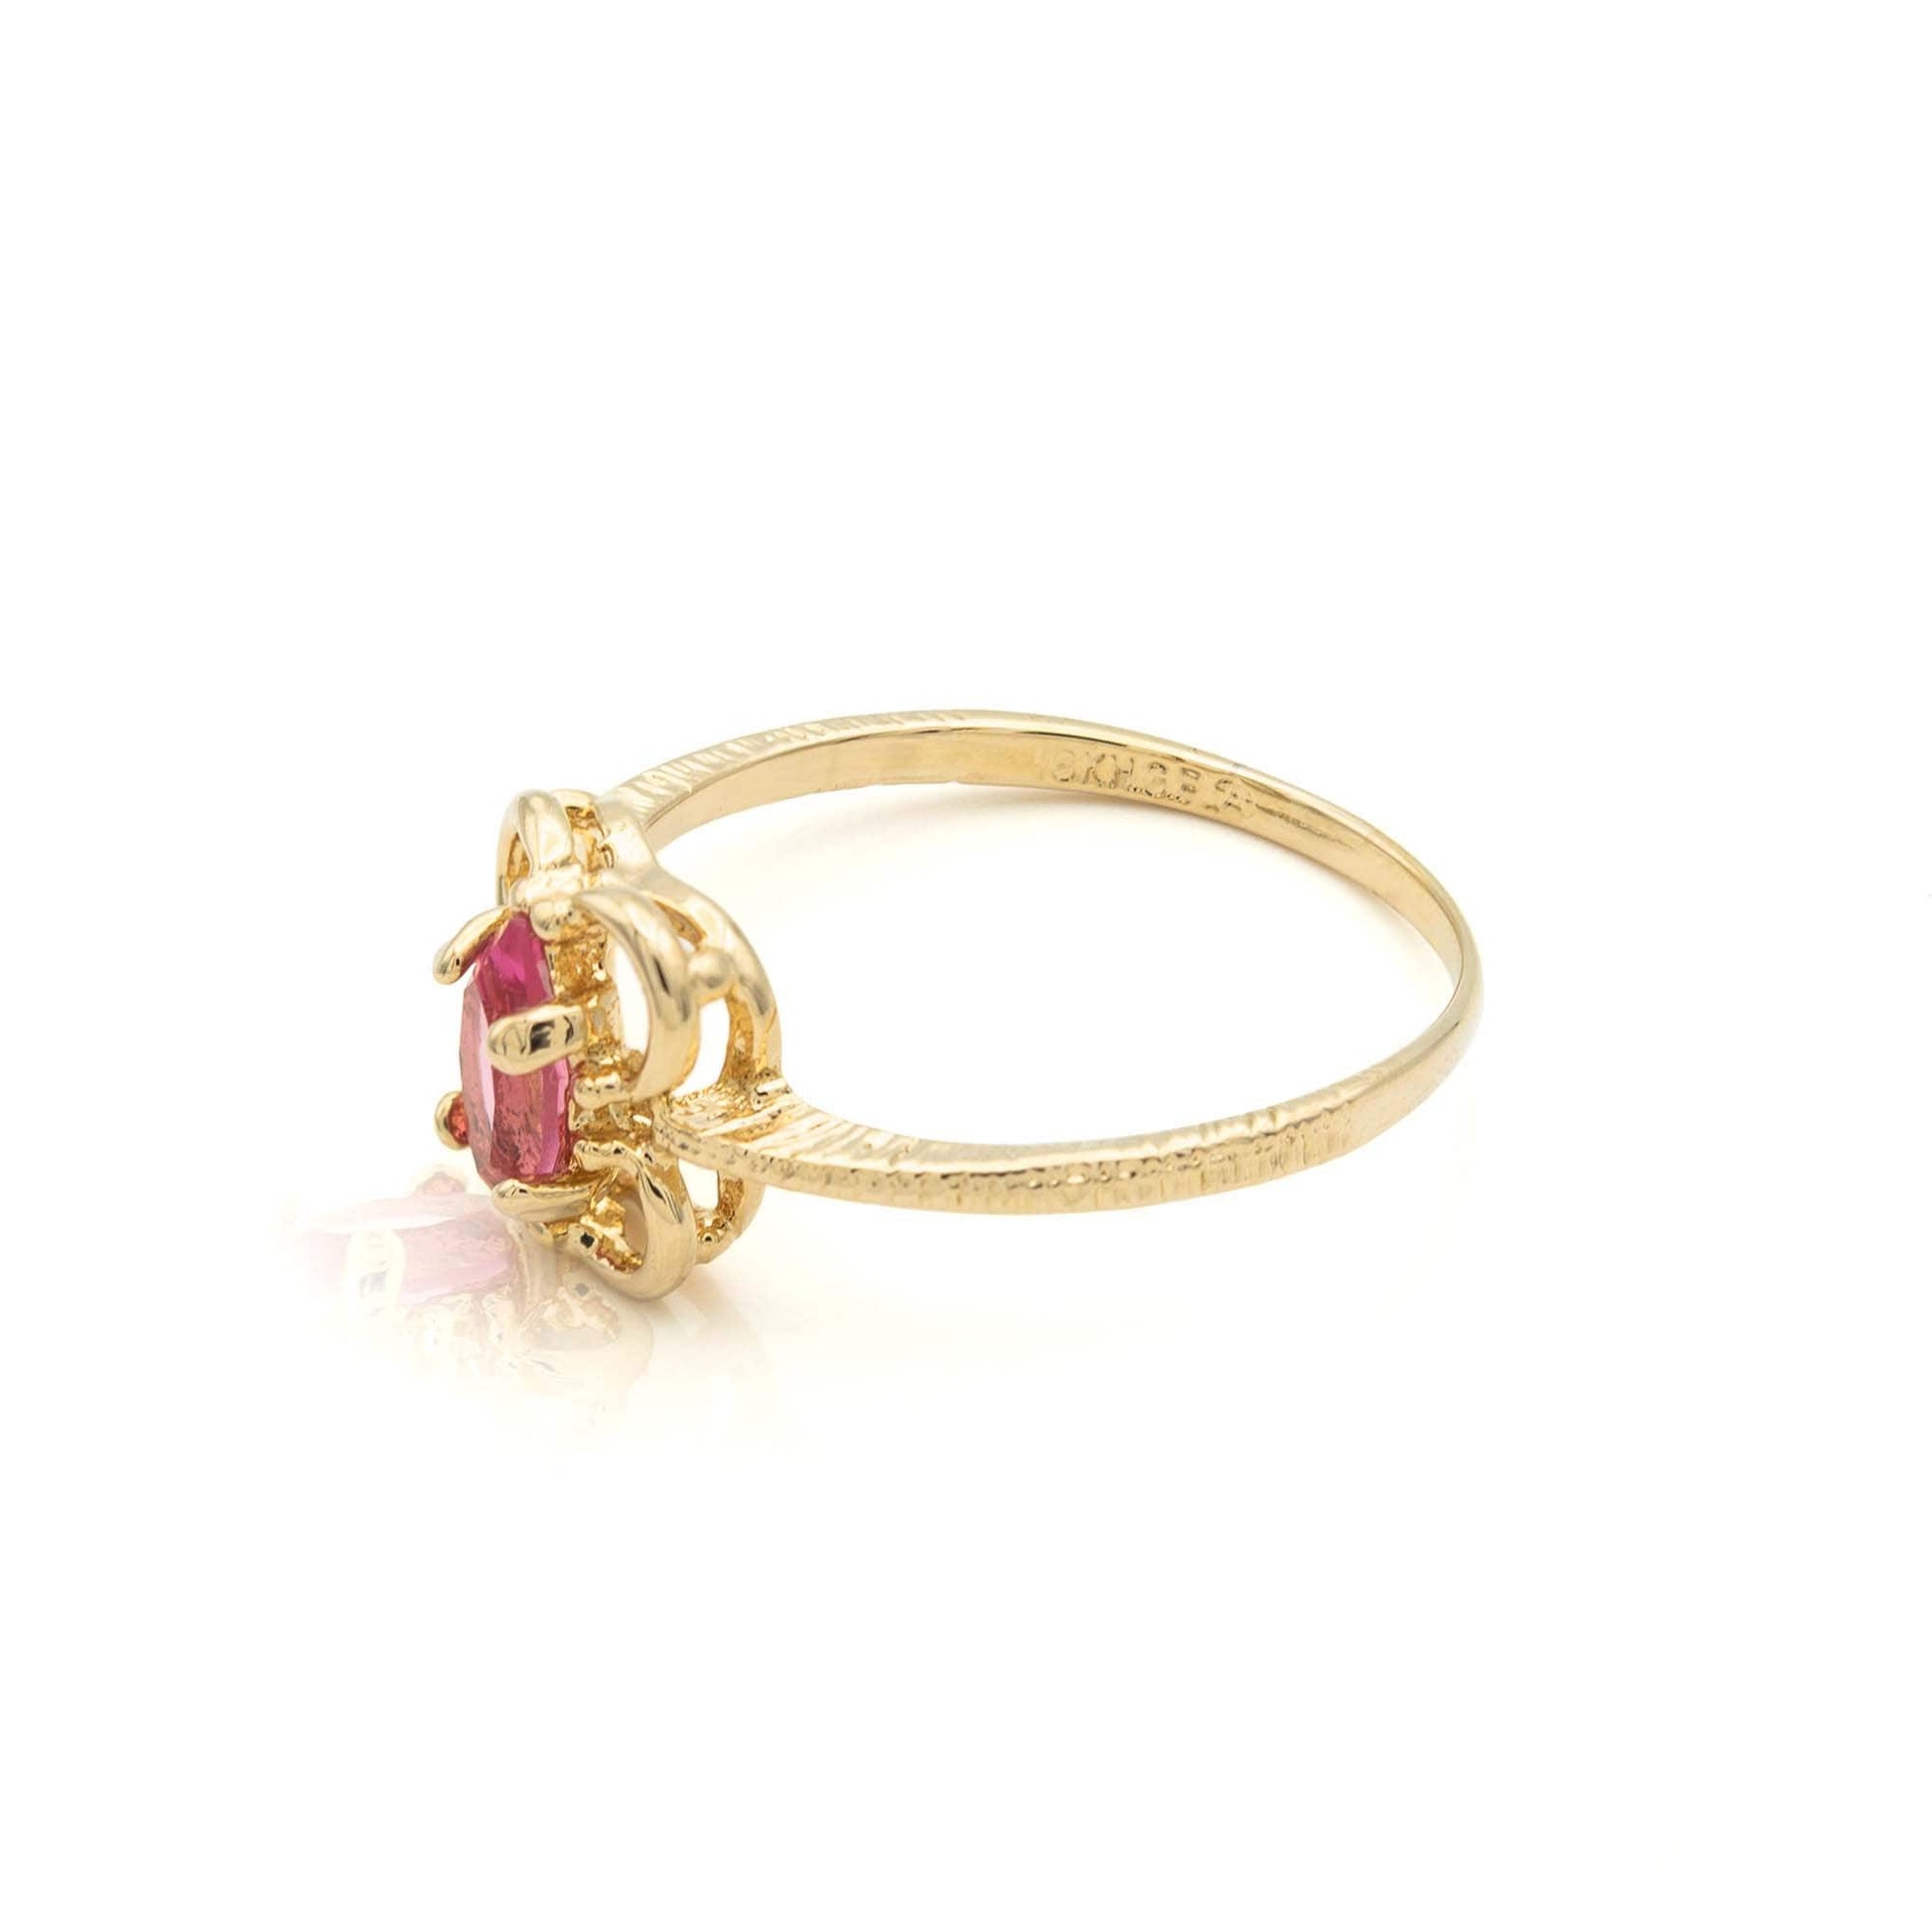 Vintage Ring Pink Tourmaline Austrian Crystal Ring 18k Gold Made in the USA R586 - Limited Stock - Never Worn